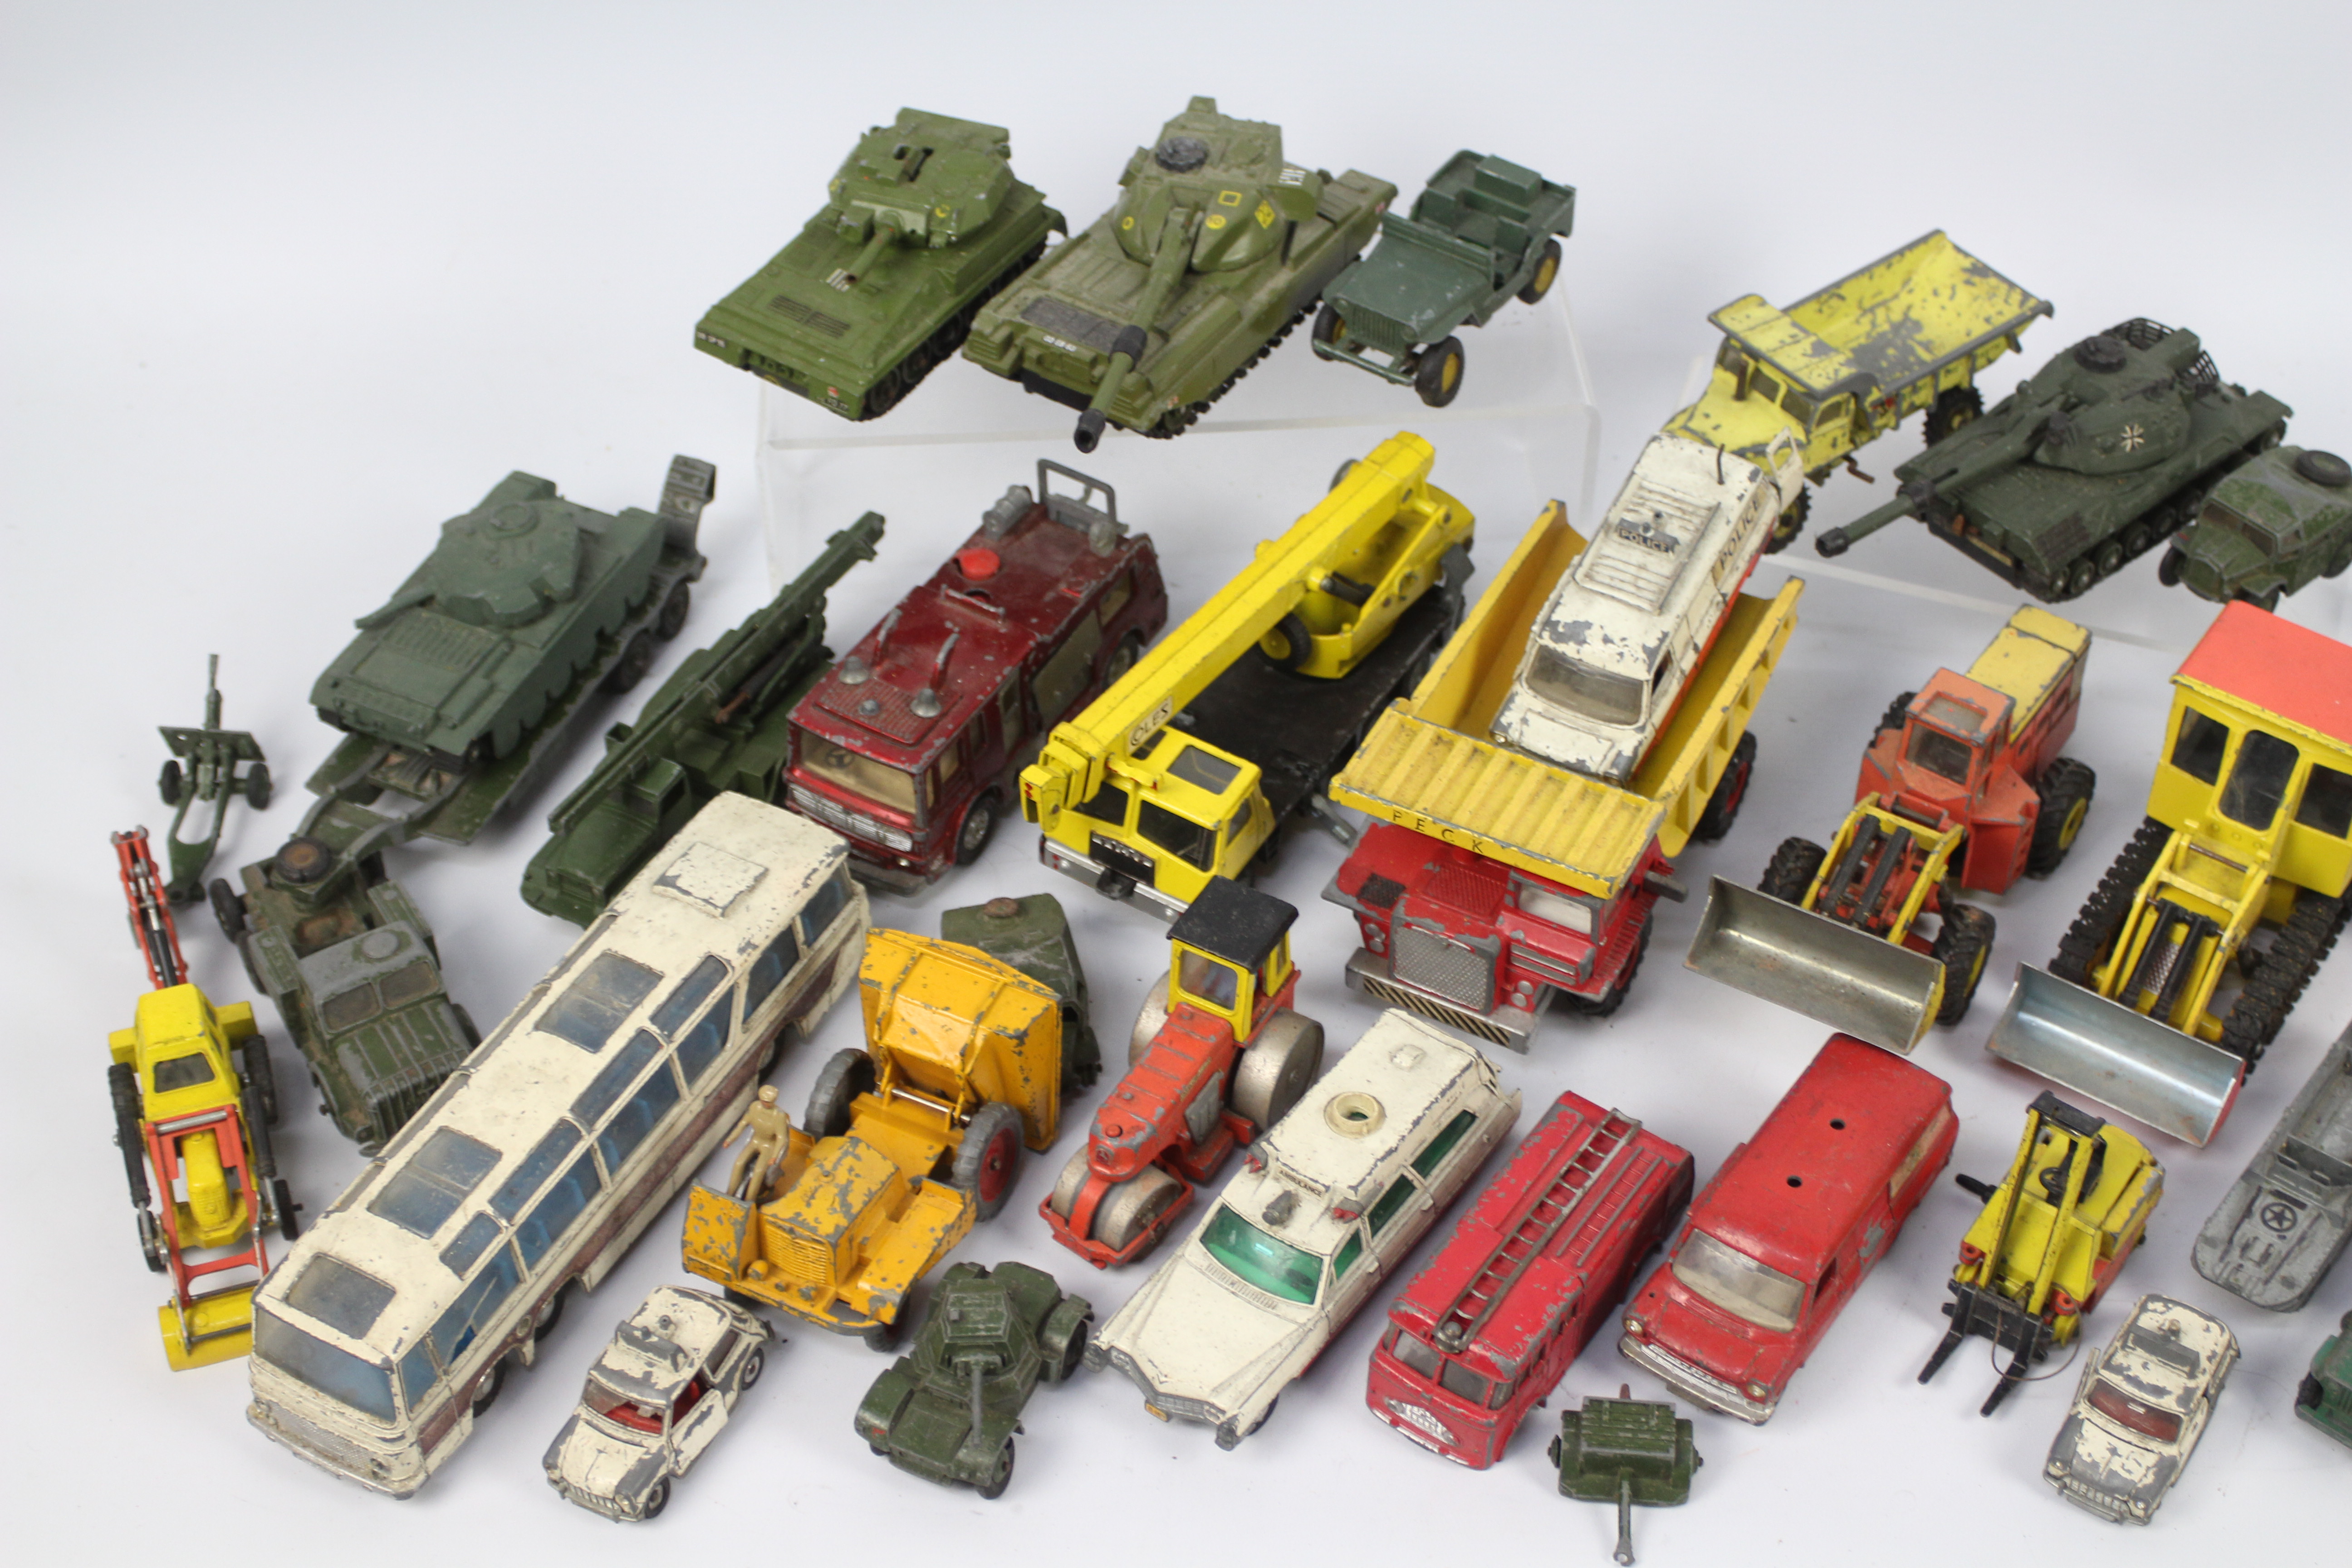 Dinky Toys - In excess of 20 loose Dinky Toys in playworn condition to include: DUKW Amphibian, - Image 2 of 4